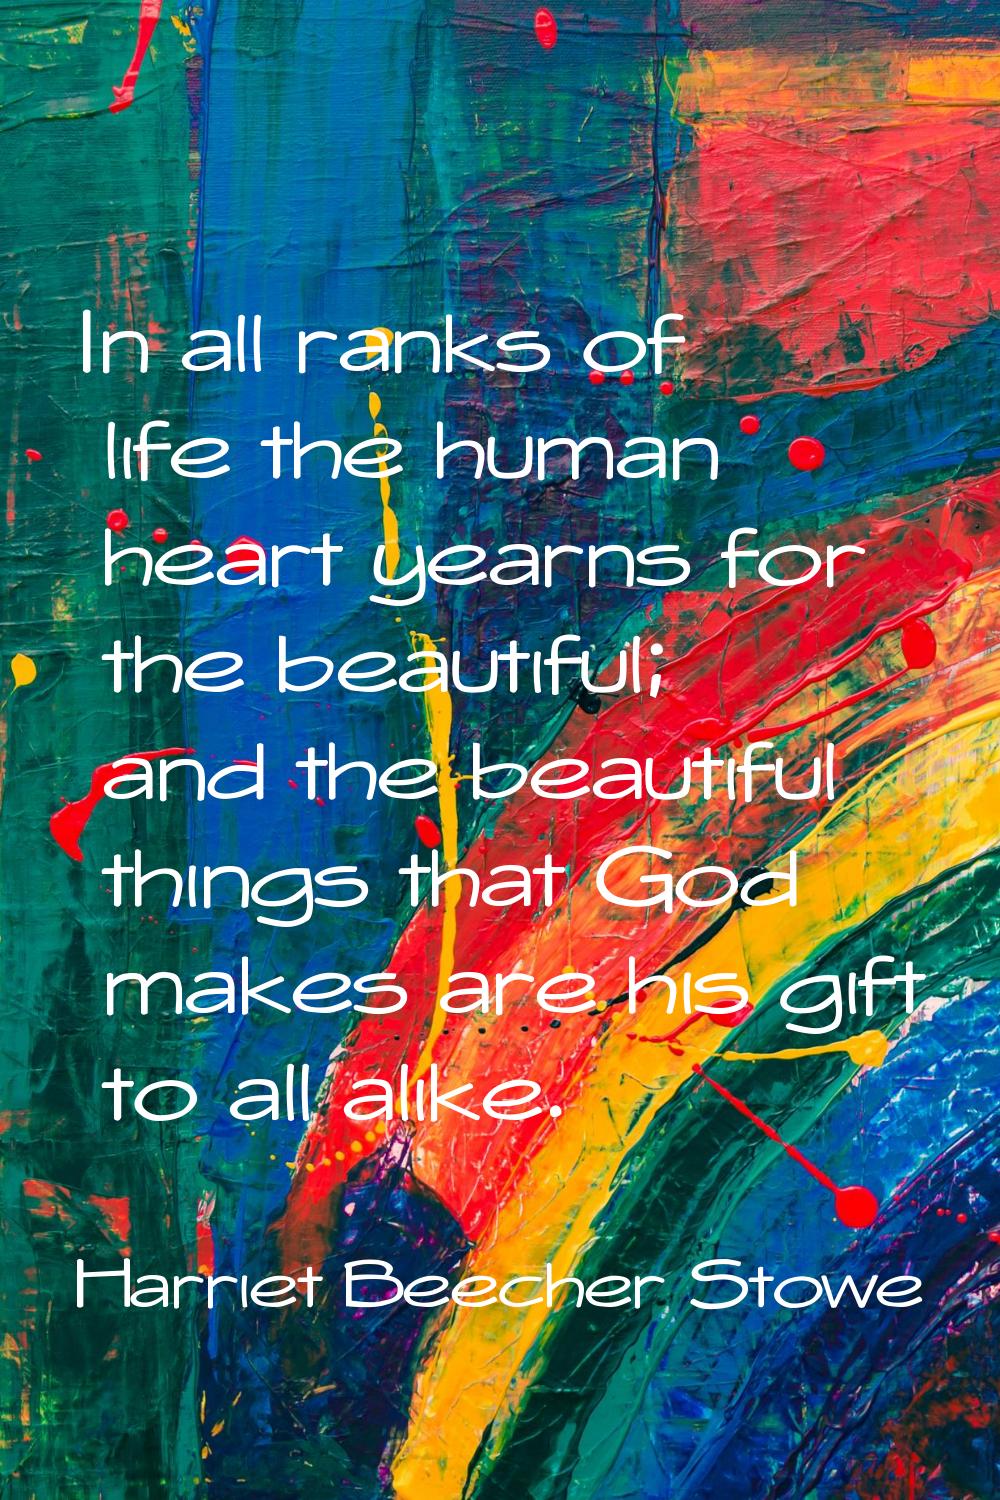 In all ranks of life the human heart yearns for the beautiful; and the beautiful things that God ma